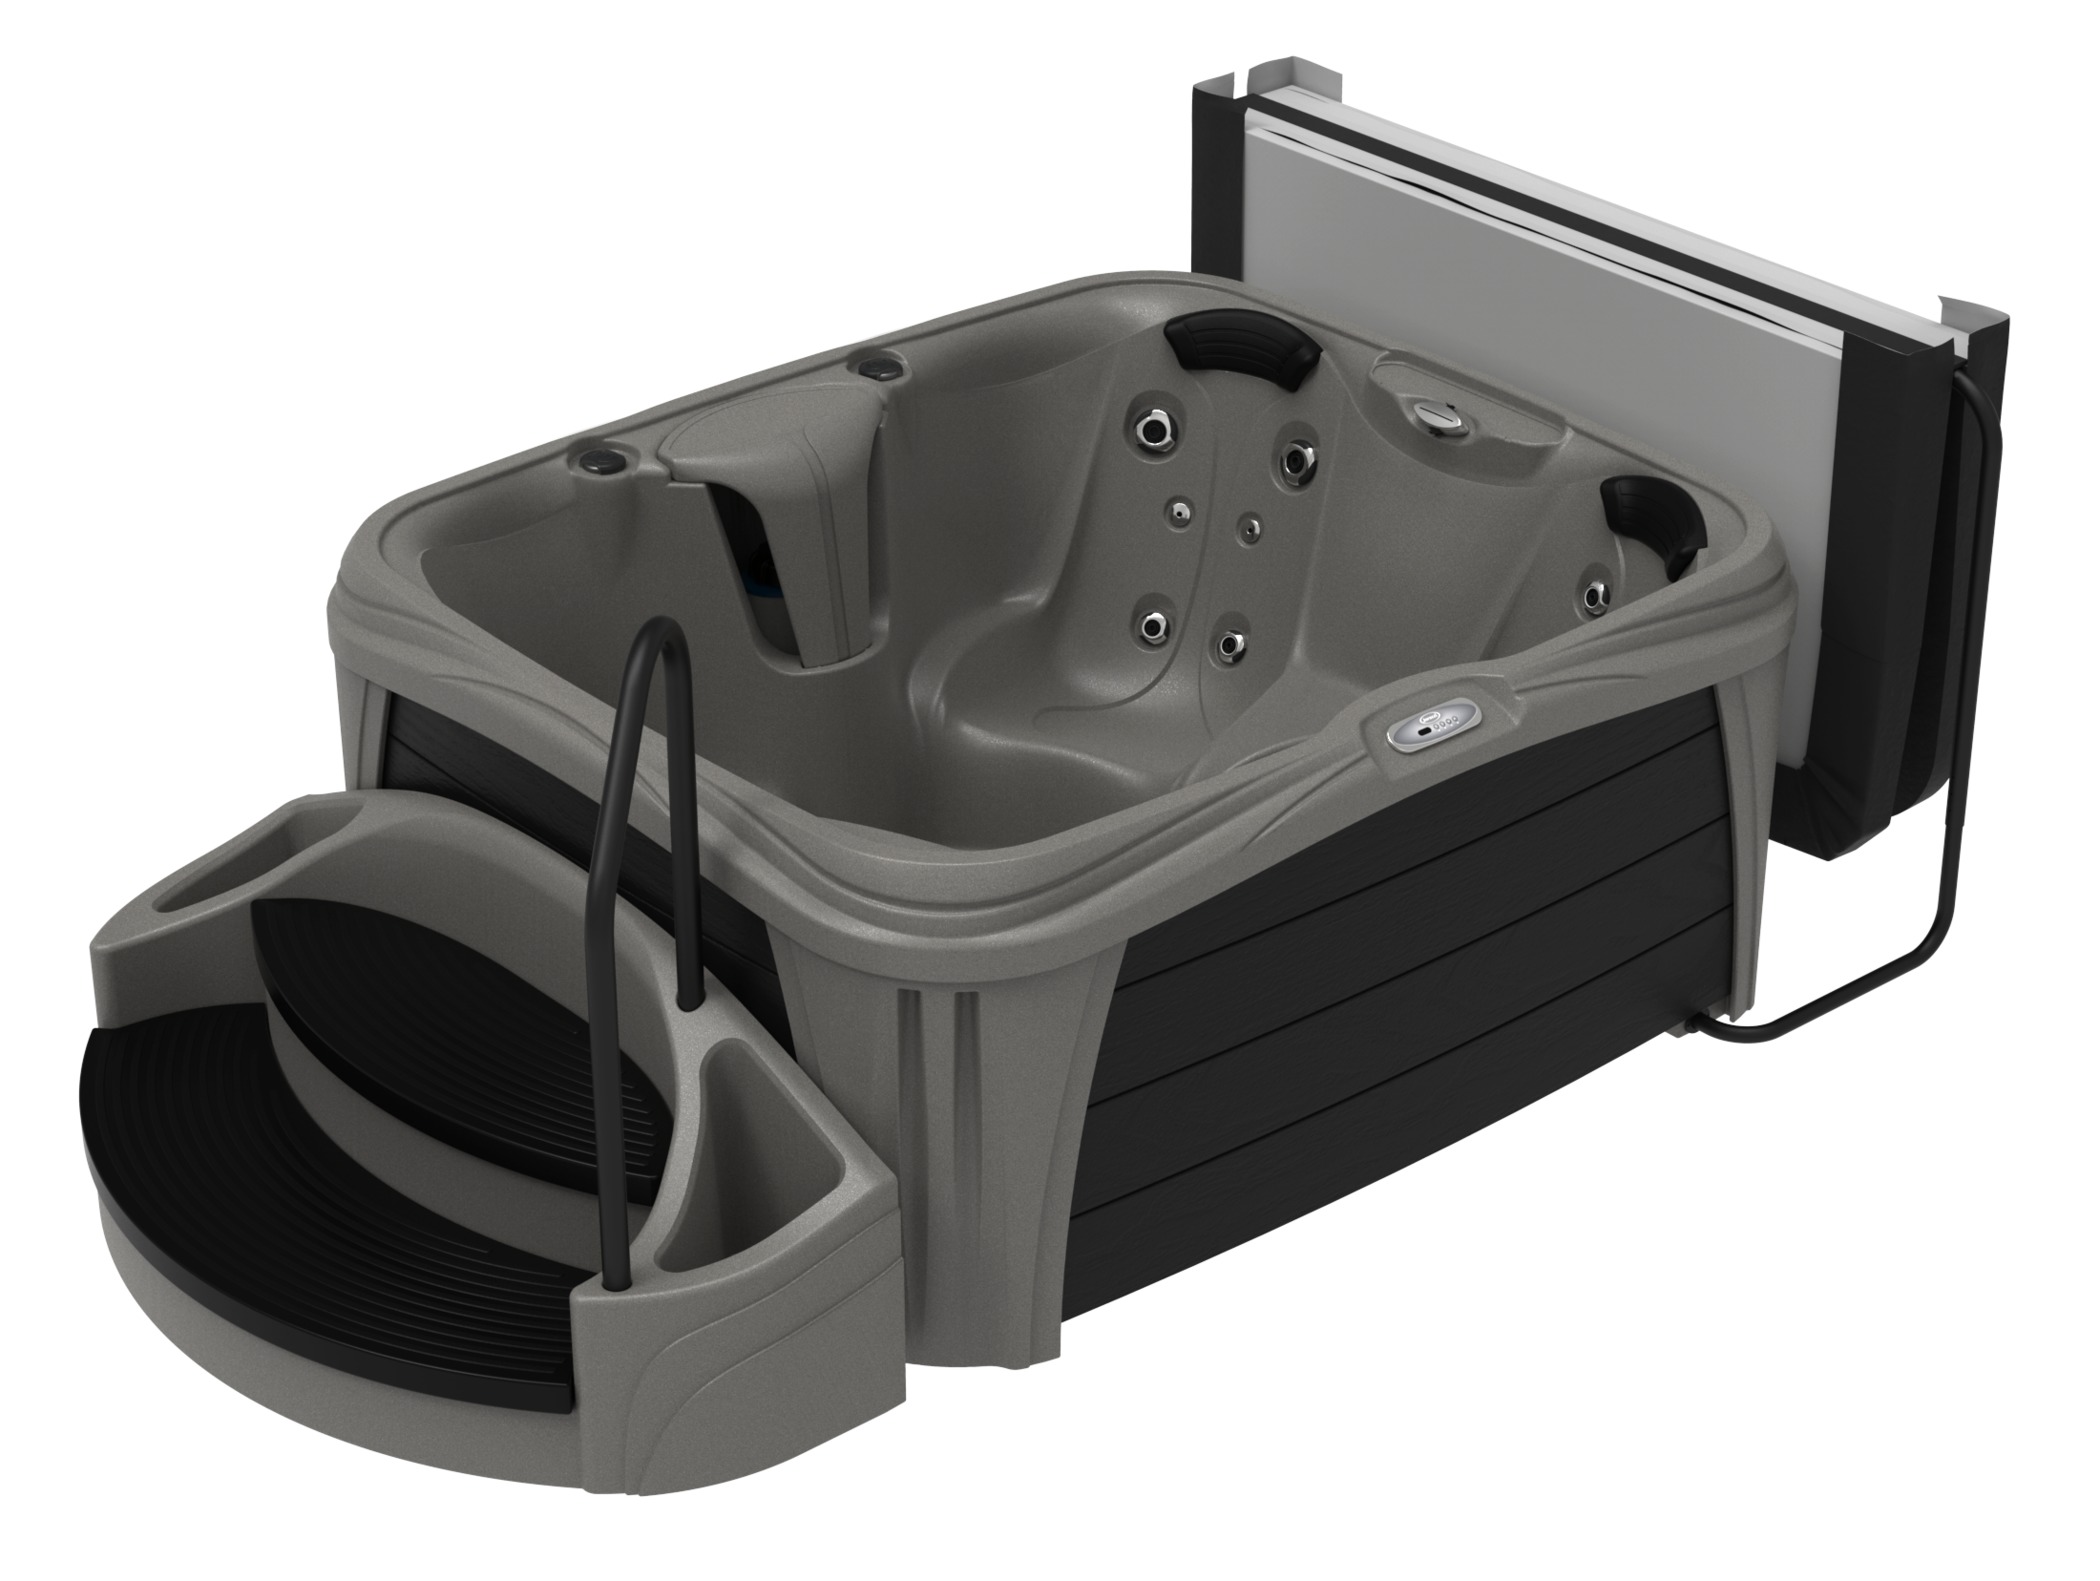 Jacuzzi Play Collection hot tub.